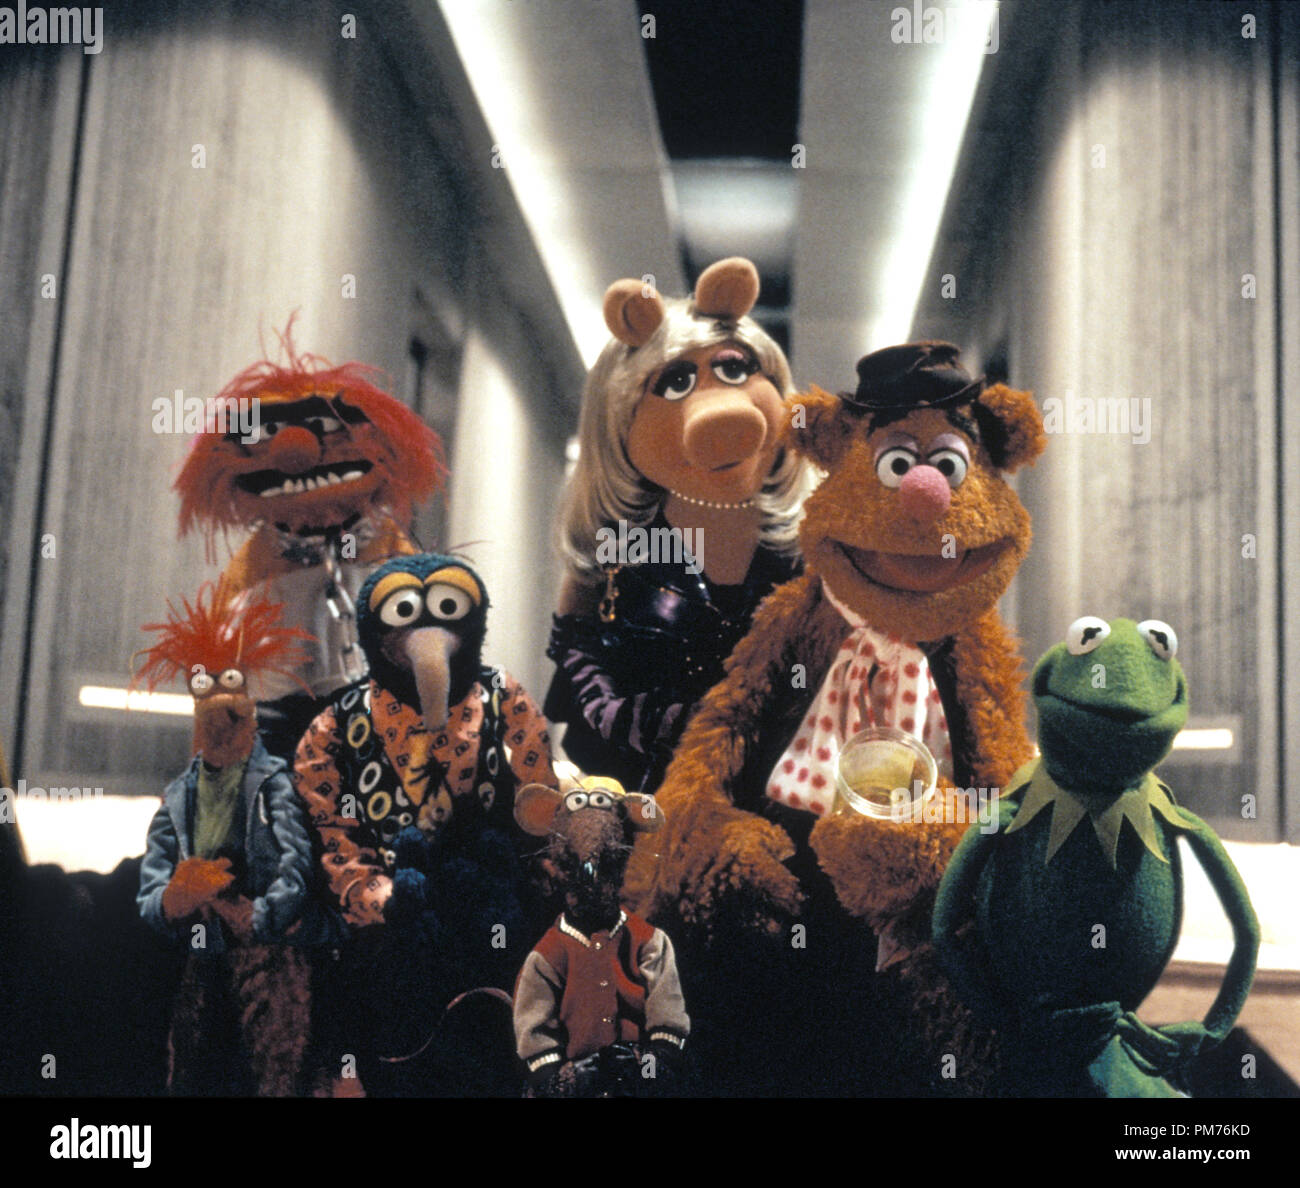 Film Still / Publicity Still from 'Muppets from Space' Animal, Gonzo, Rizzo the Rat, Miss Piggy, Fozzie Bear, Kermit the Frog, Beaker © 1999 Columbia Pictures Photo Credit: James Bridges    File Reference # 30973436THA  For Editorial Use Only -  All Rights Reserved Stock Photo